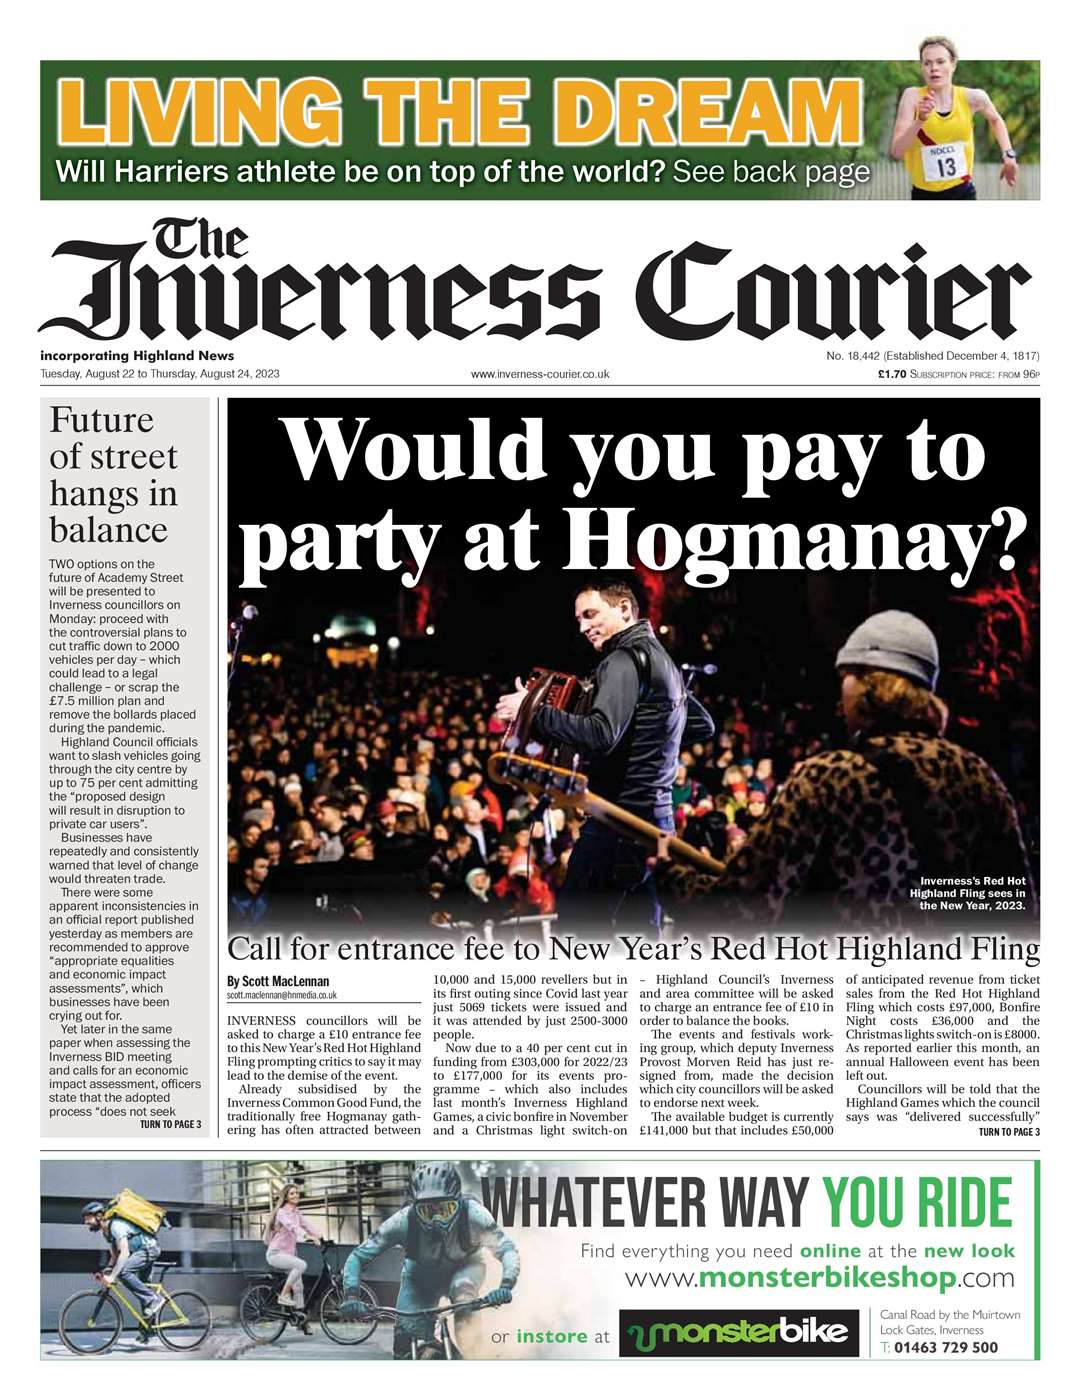 The Inverness Courier, August 22, front page.